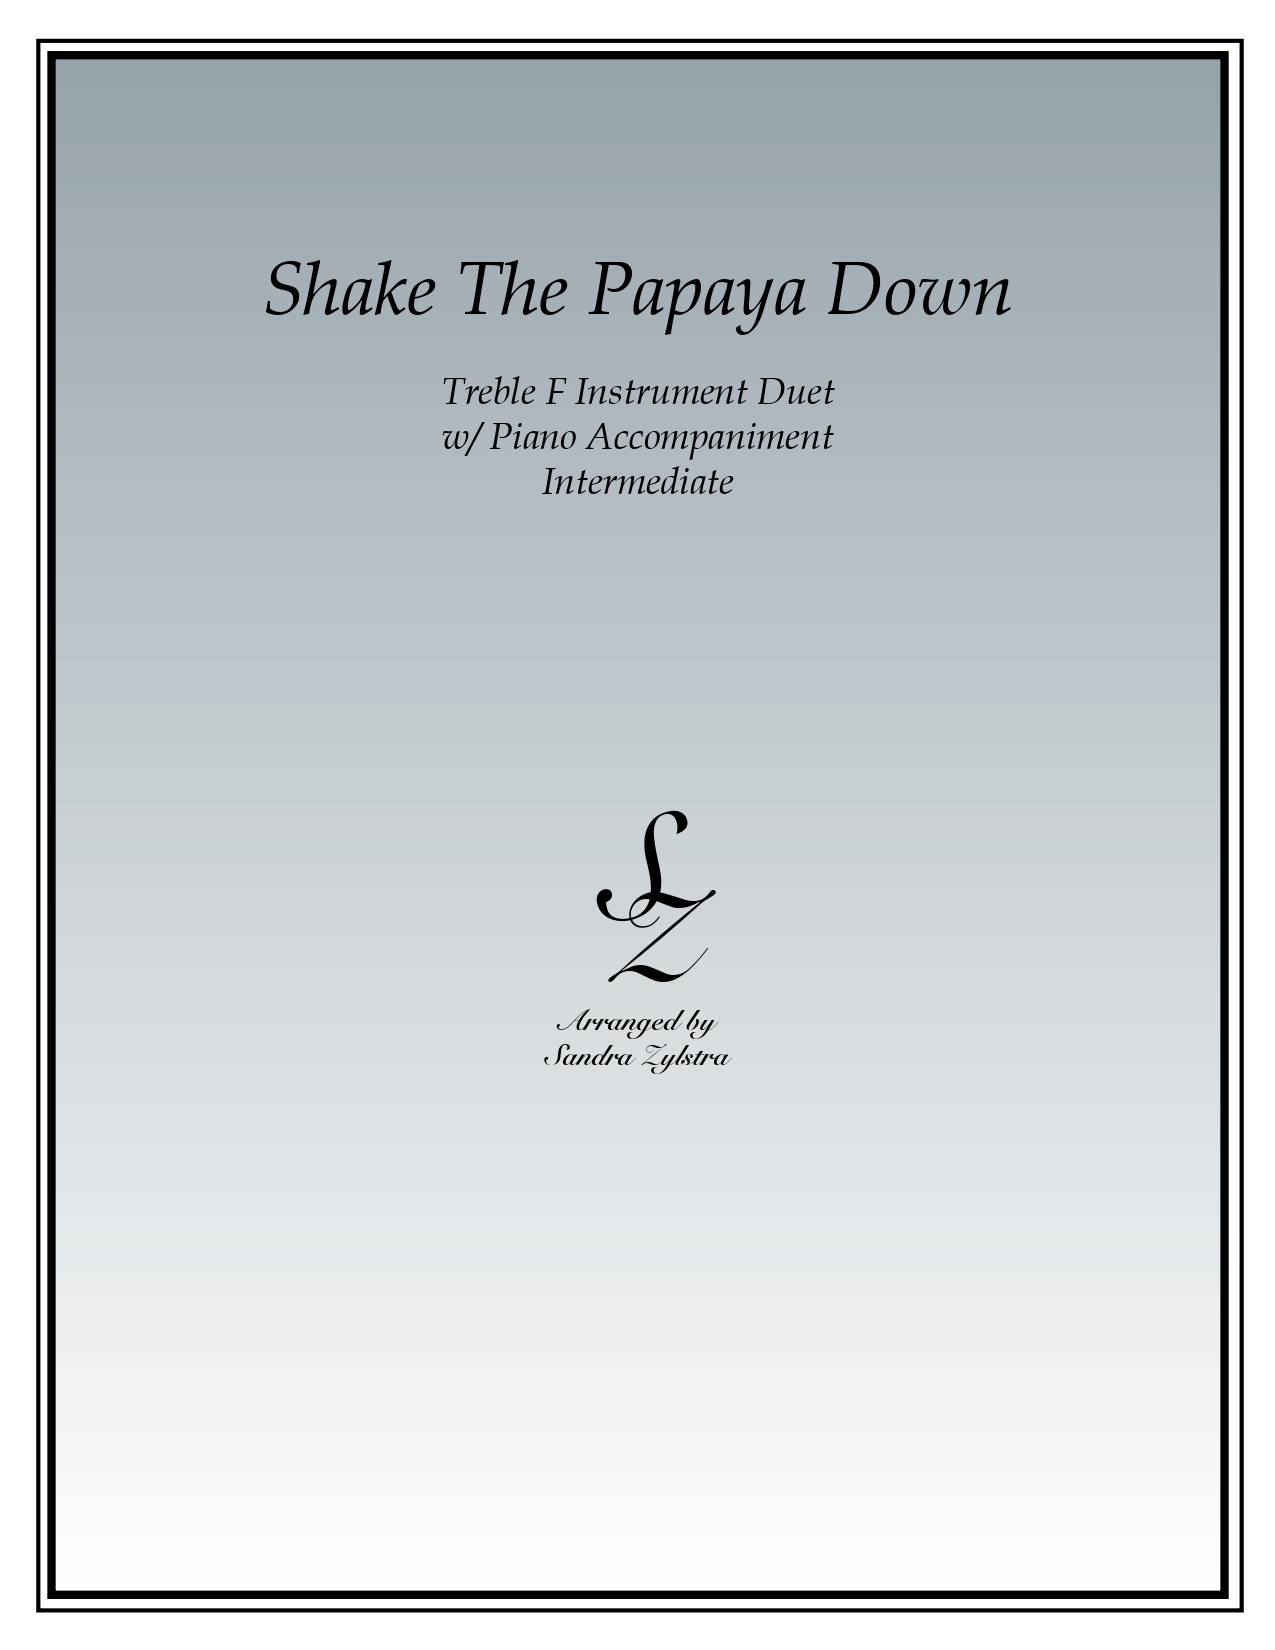 Shake The Papaya Down F instrument duet parts cover page 00011